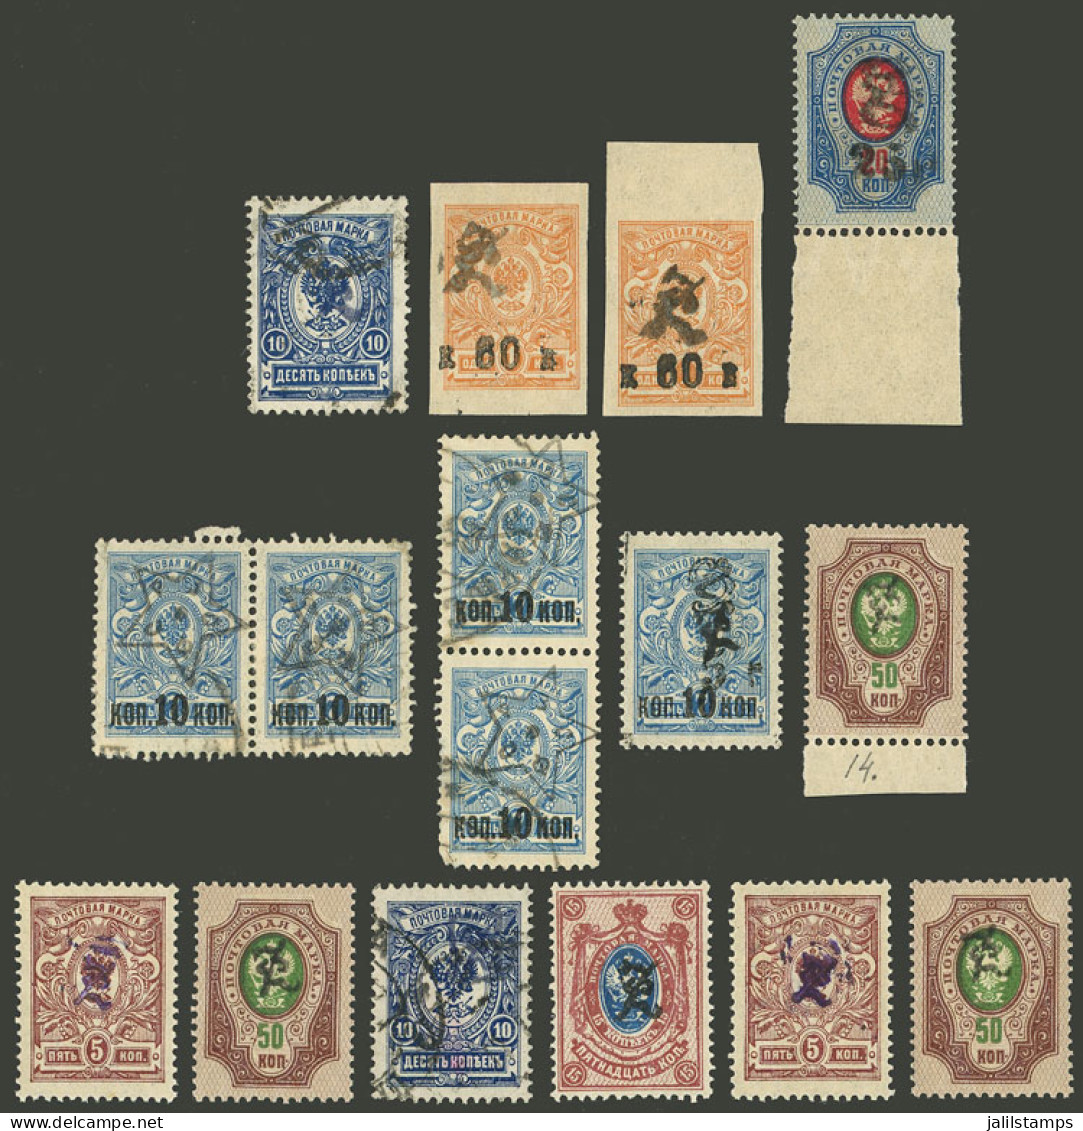 ARMENIA: Interesting Group Of Old Stamps, Used Or Mint (many MNH), Excellent Quality! - Armenië